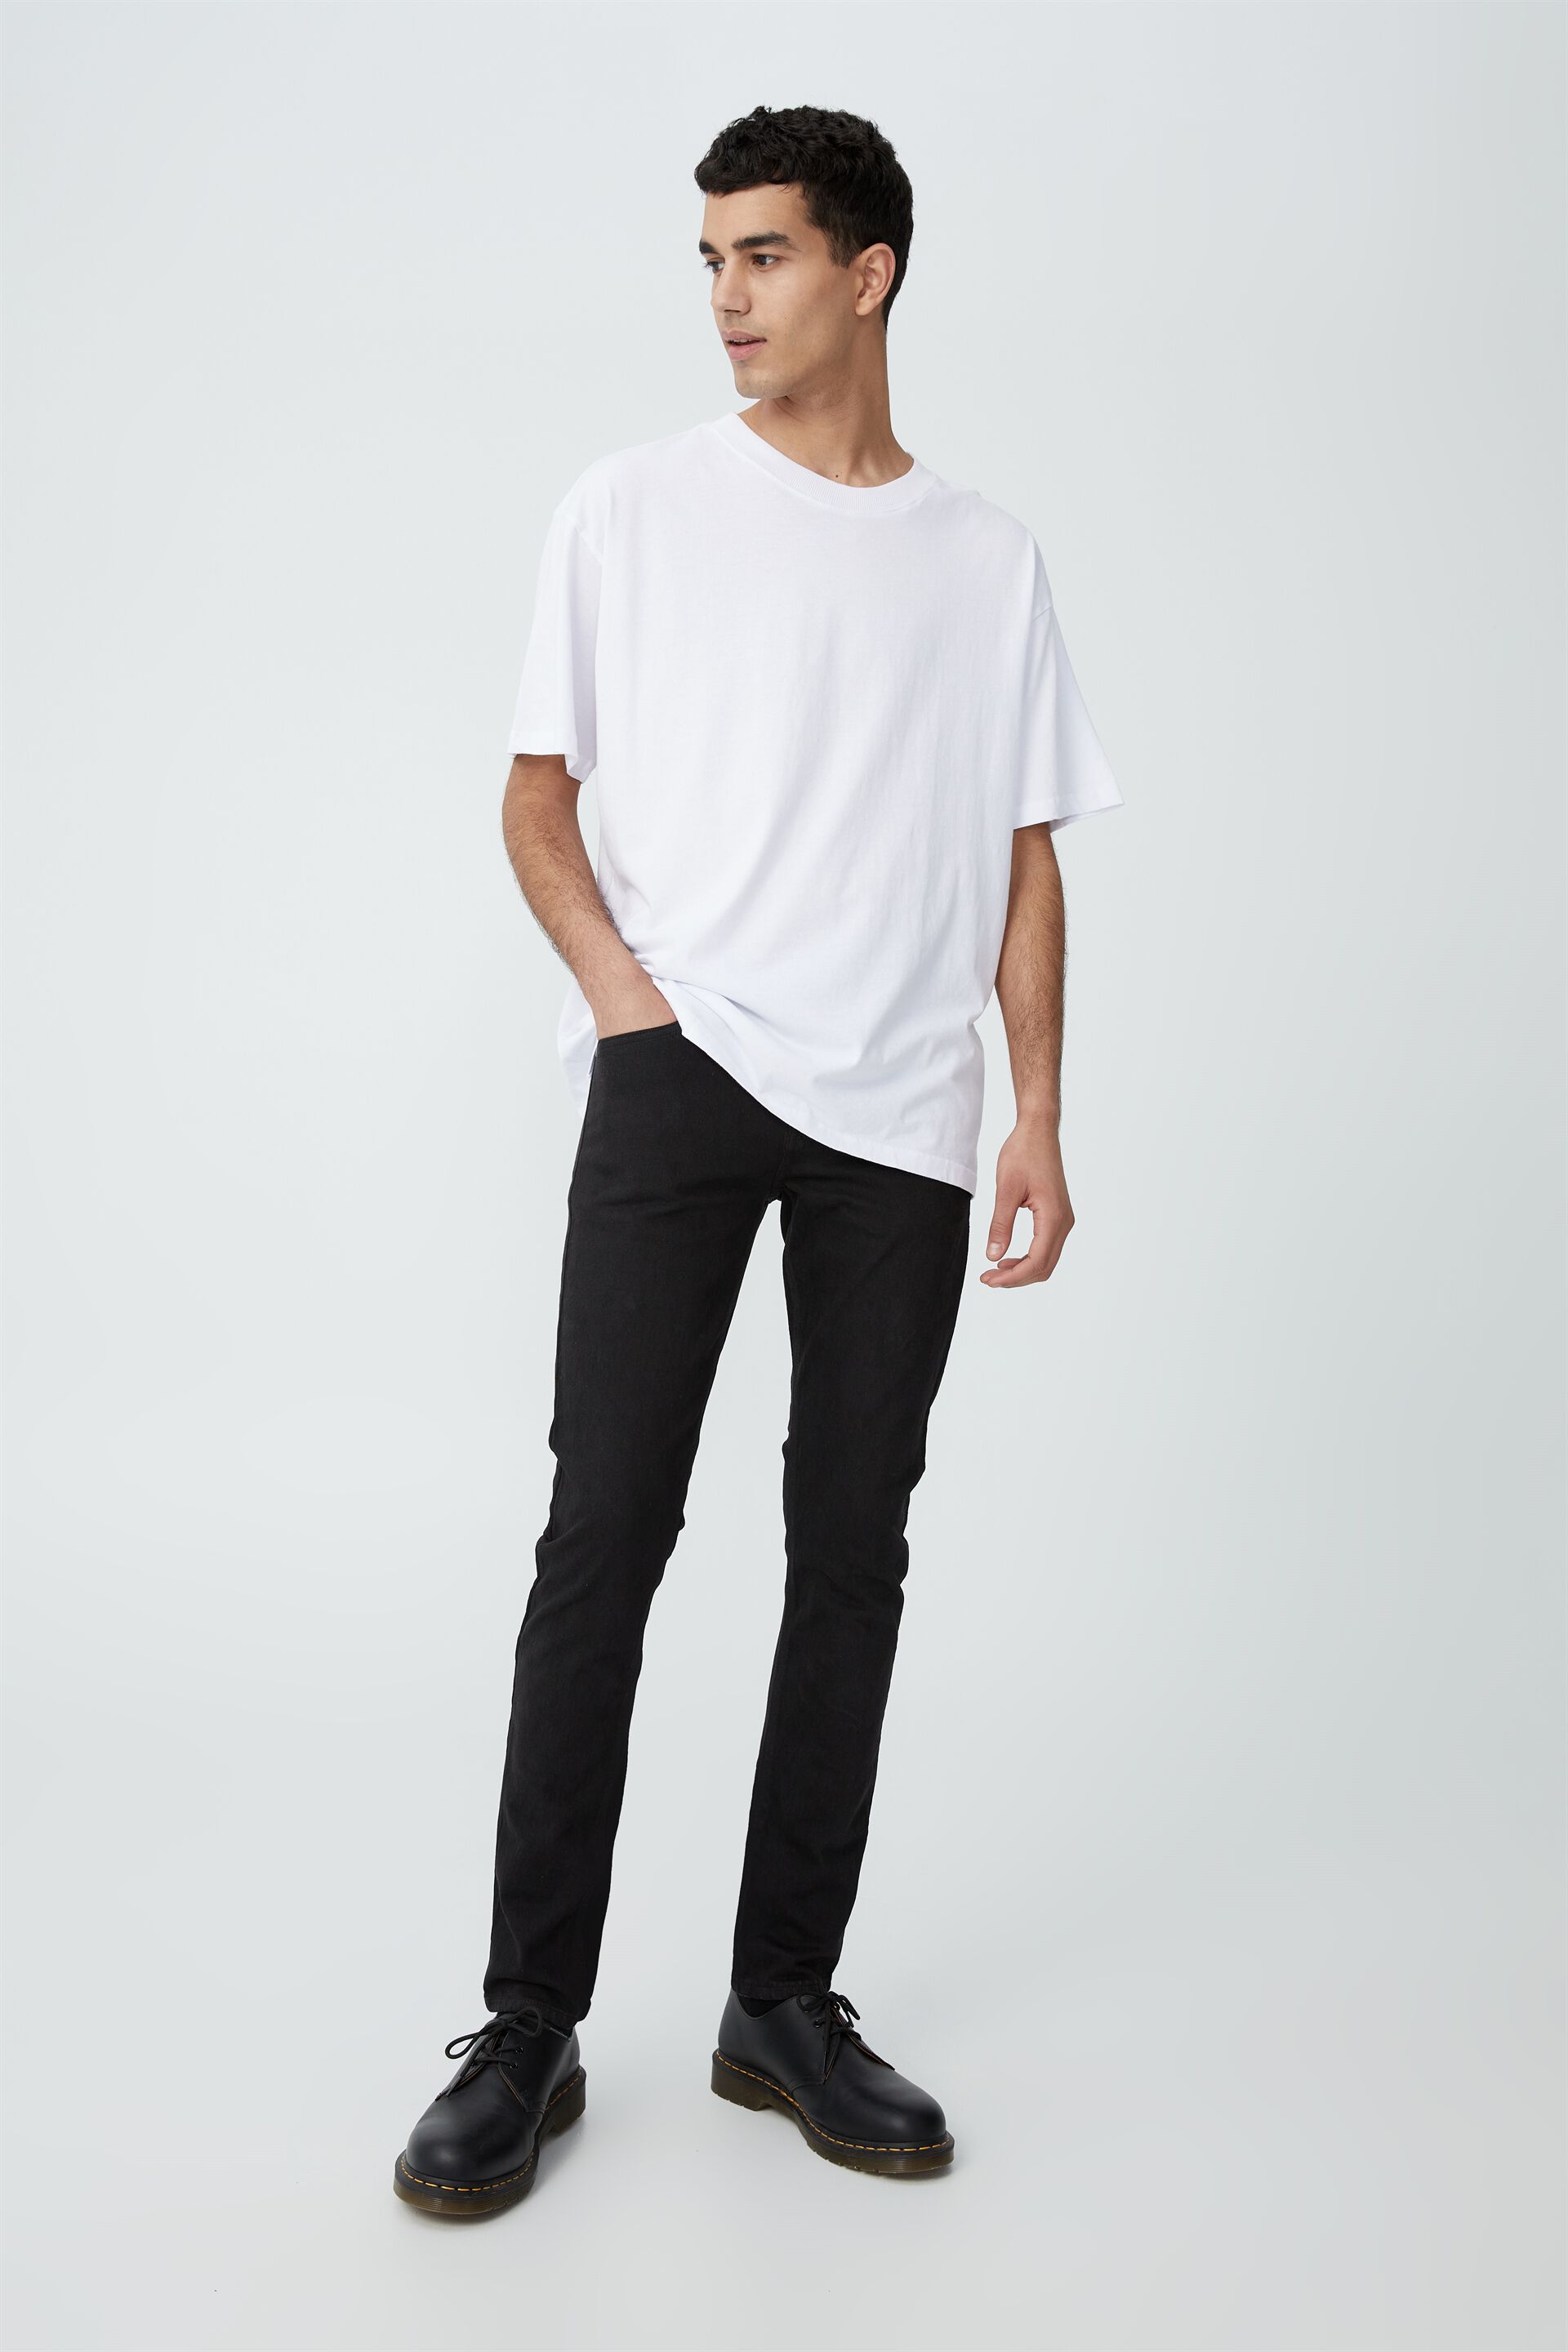 cotton on ripped jeans mens